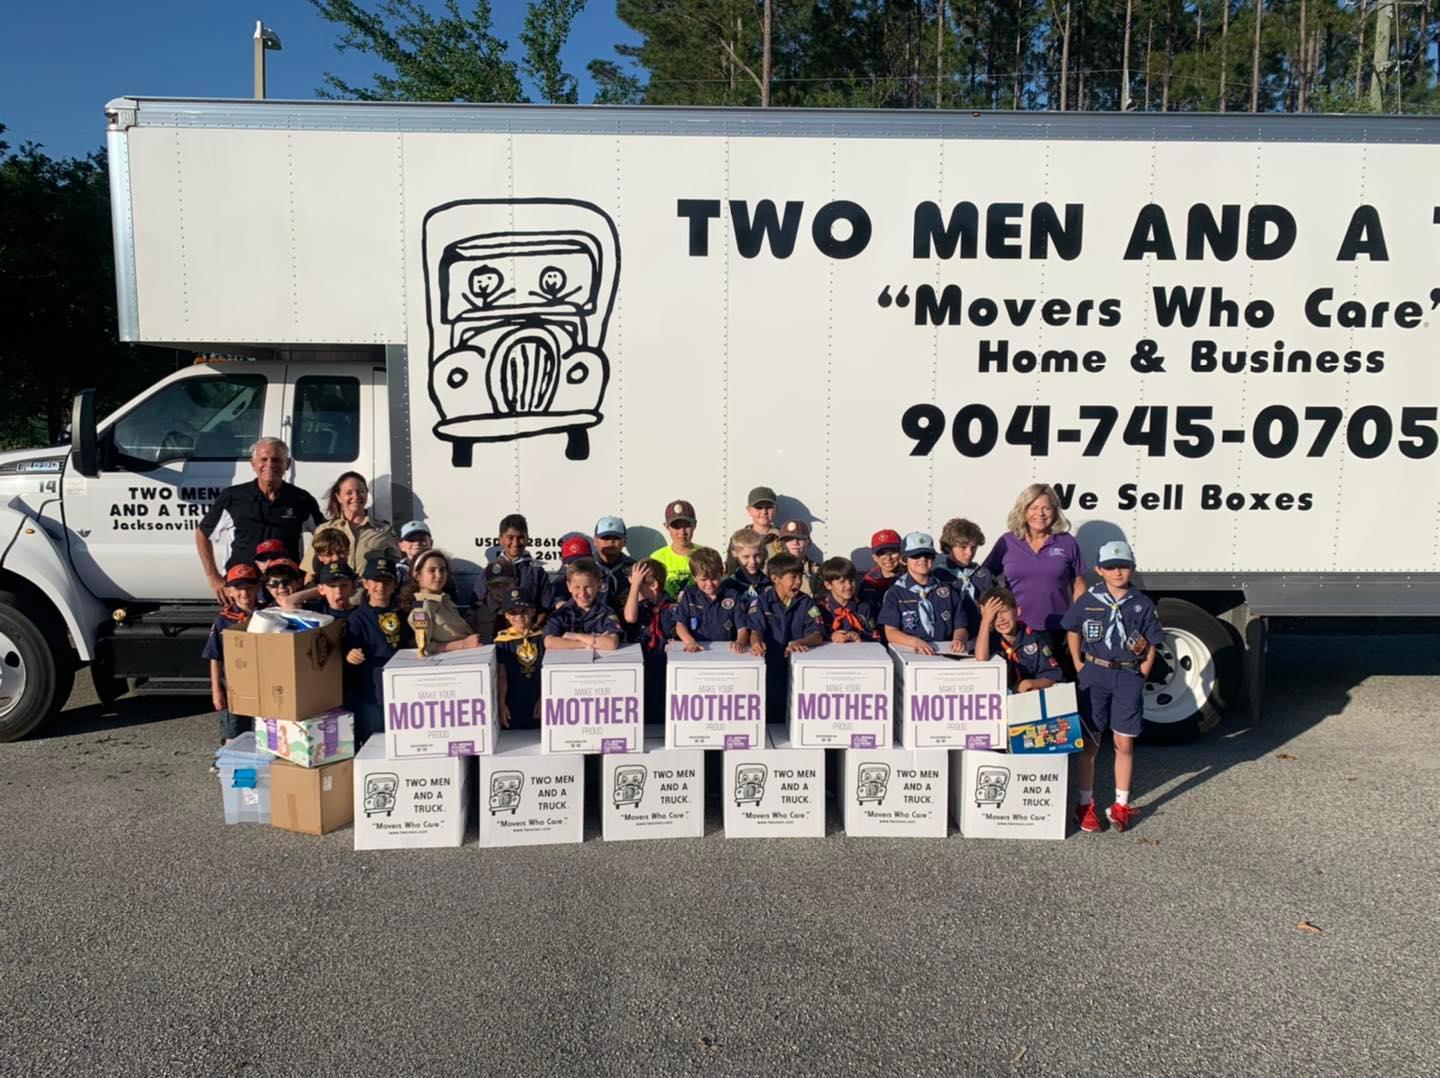 Two Men And A Truck Partner with St. Johns County Cubscouts Pack 111 for Movers for Moms